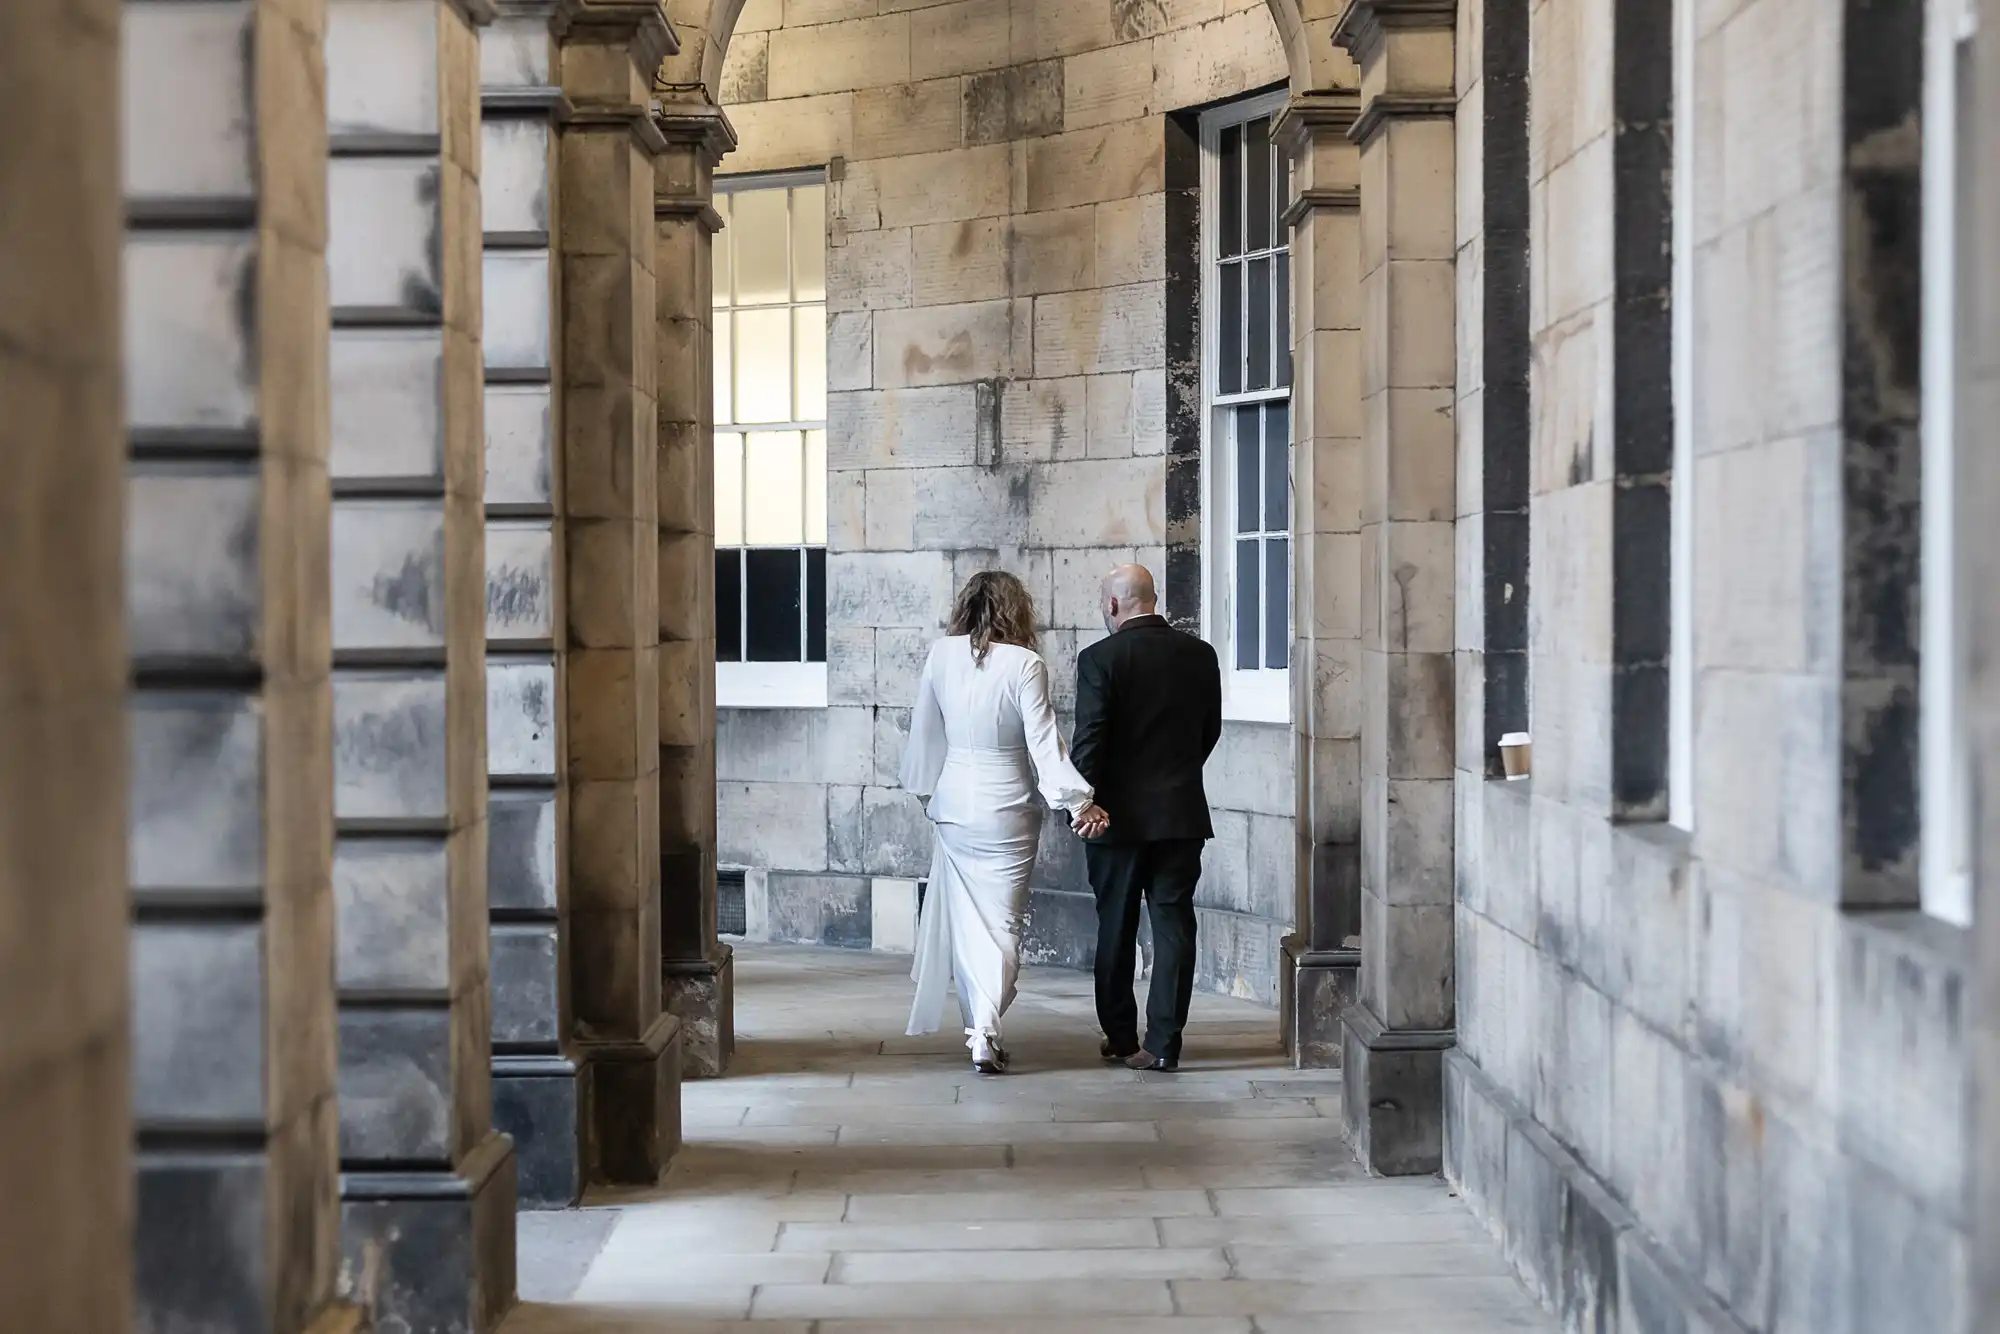 A couple, dressed in formal attire, walks hand-in-hand down a stone hallway, with high arches and large windows.